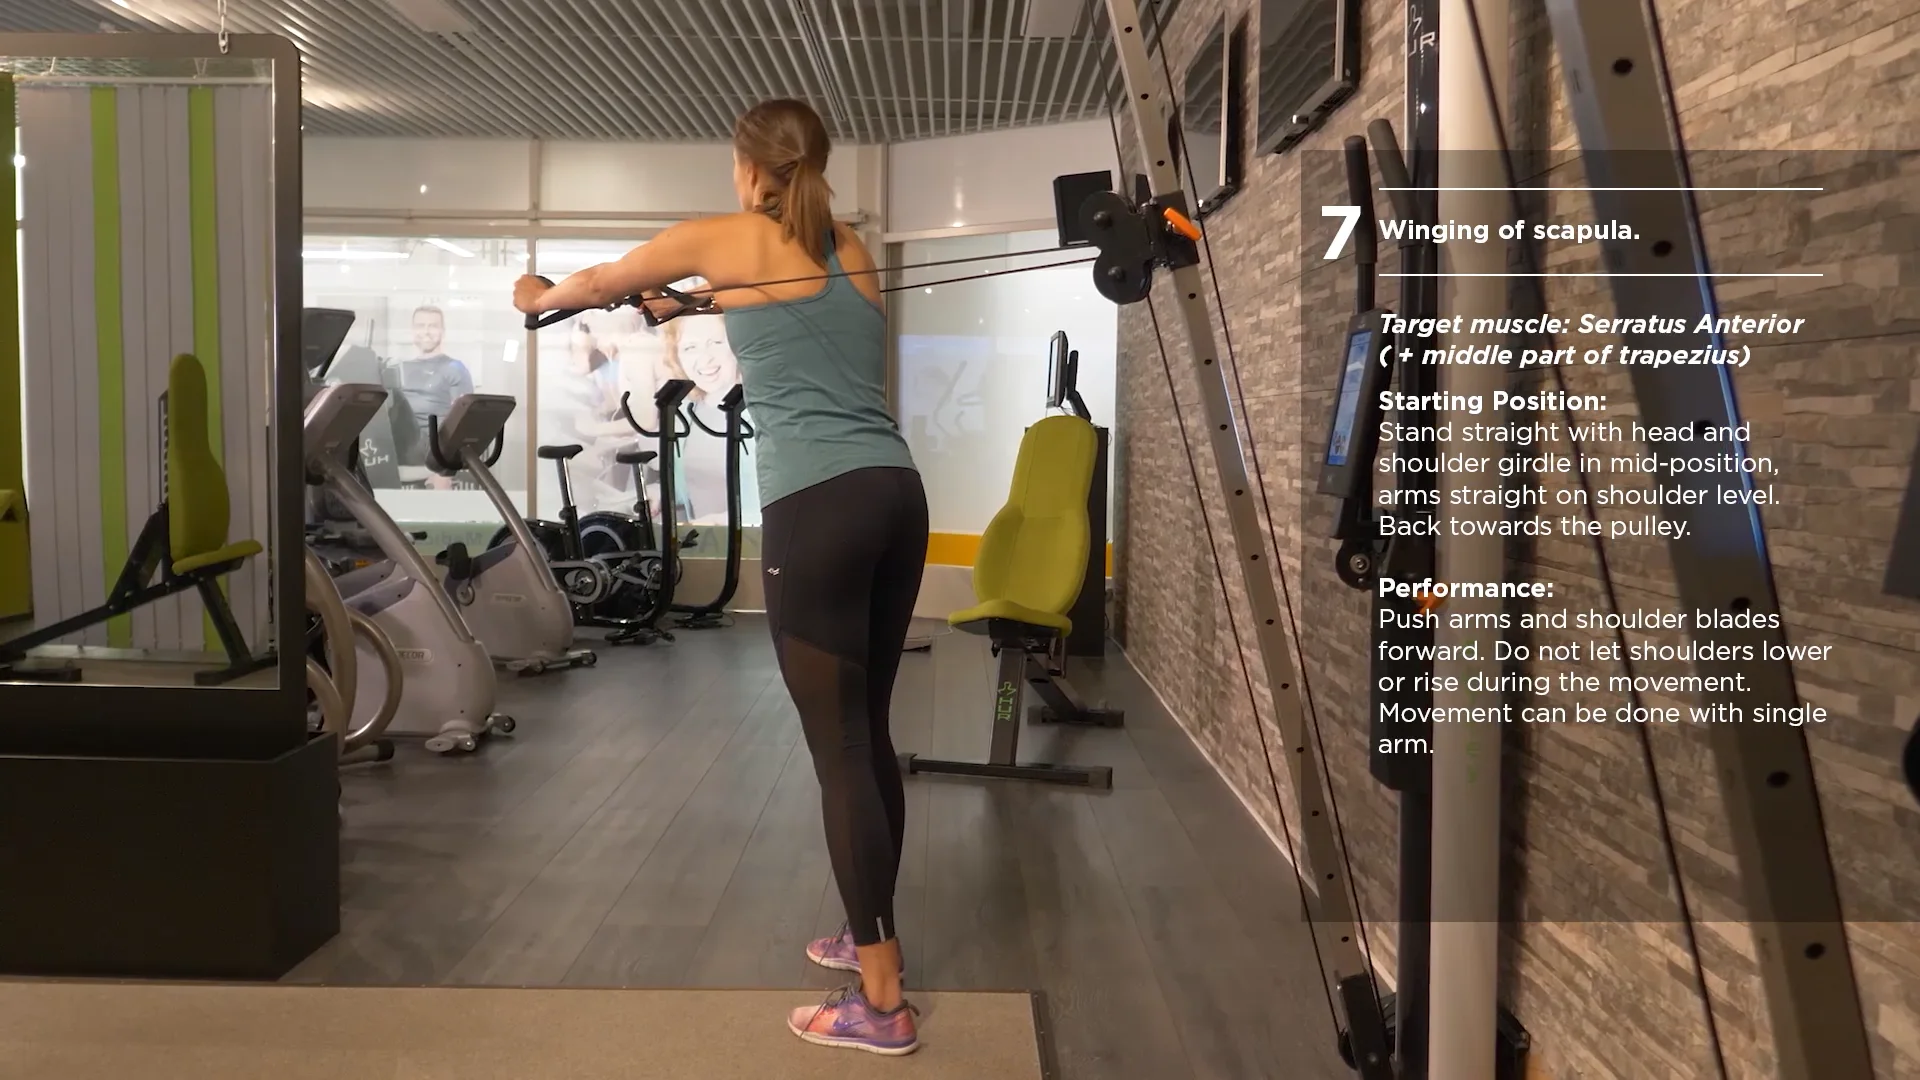 HUR Pulley - High Load Exercises for Shoulder Girdle on Vimeo